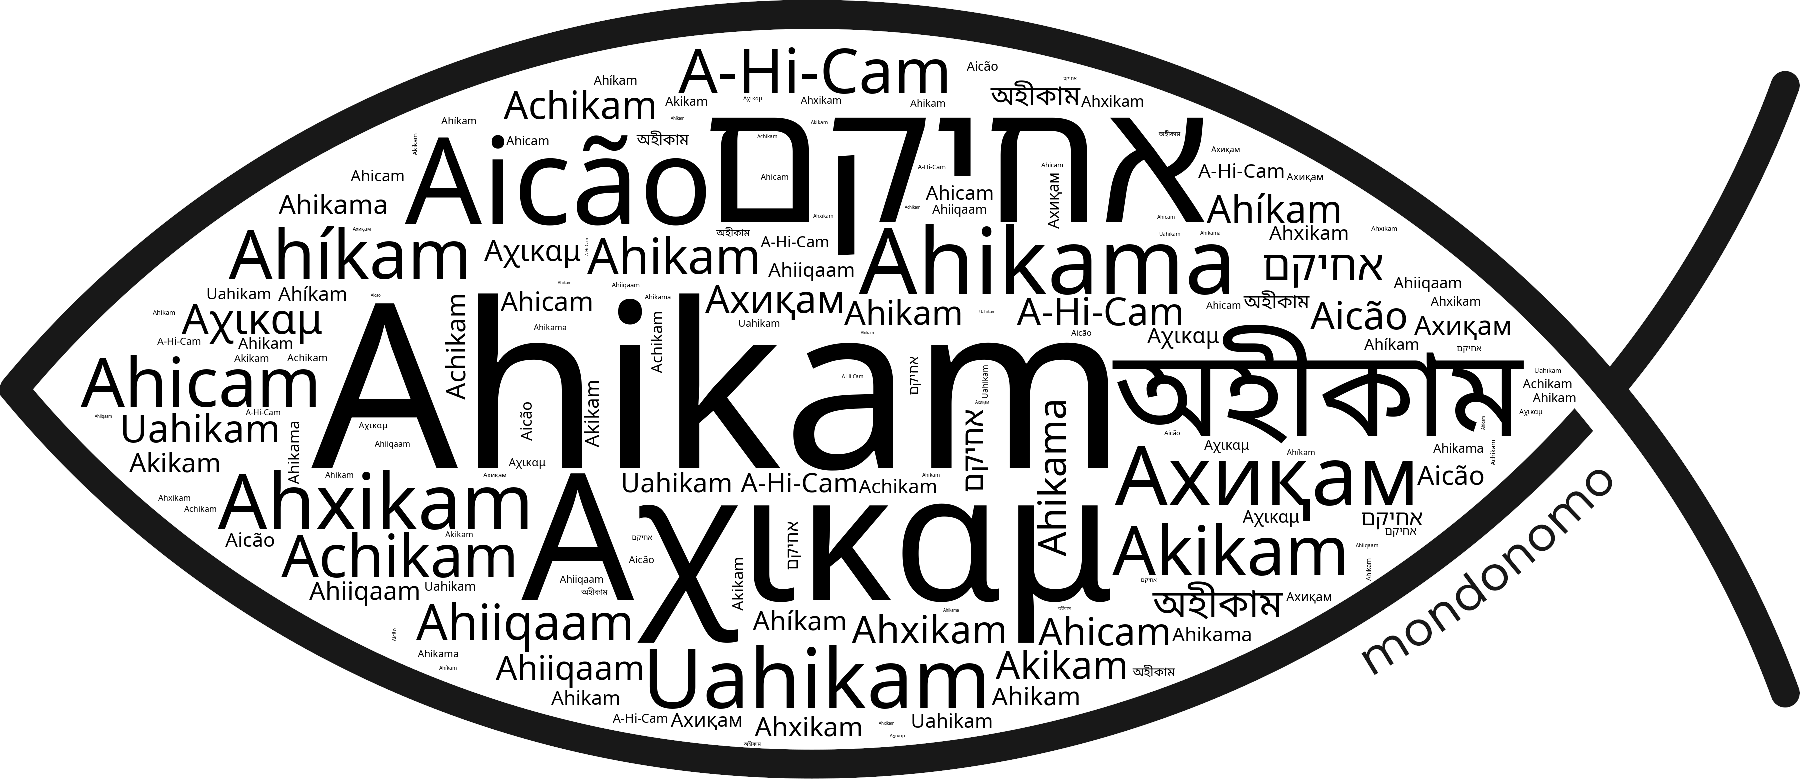 Name Ahikam in the world's Bibles